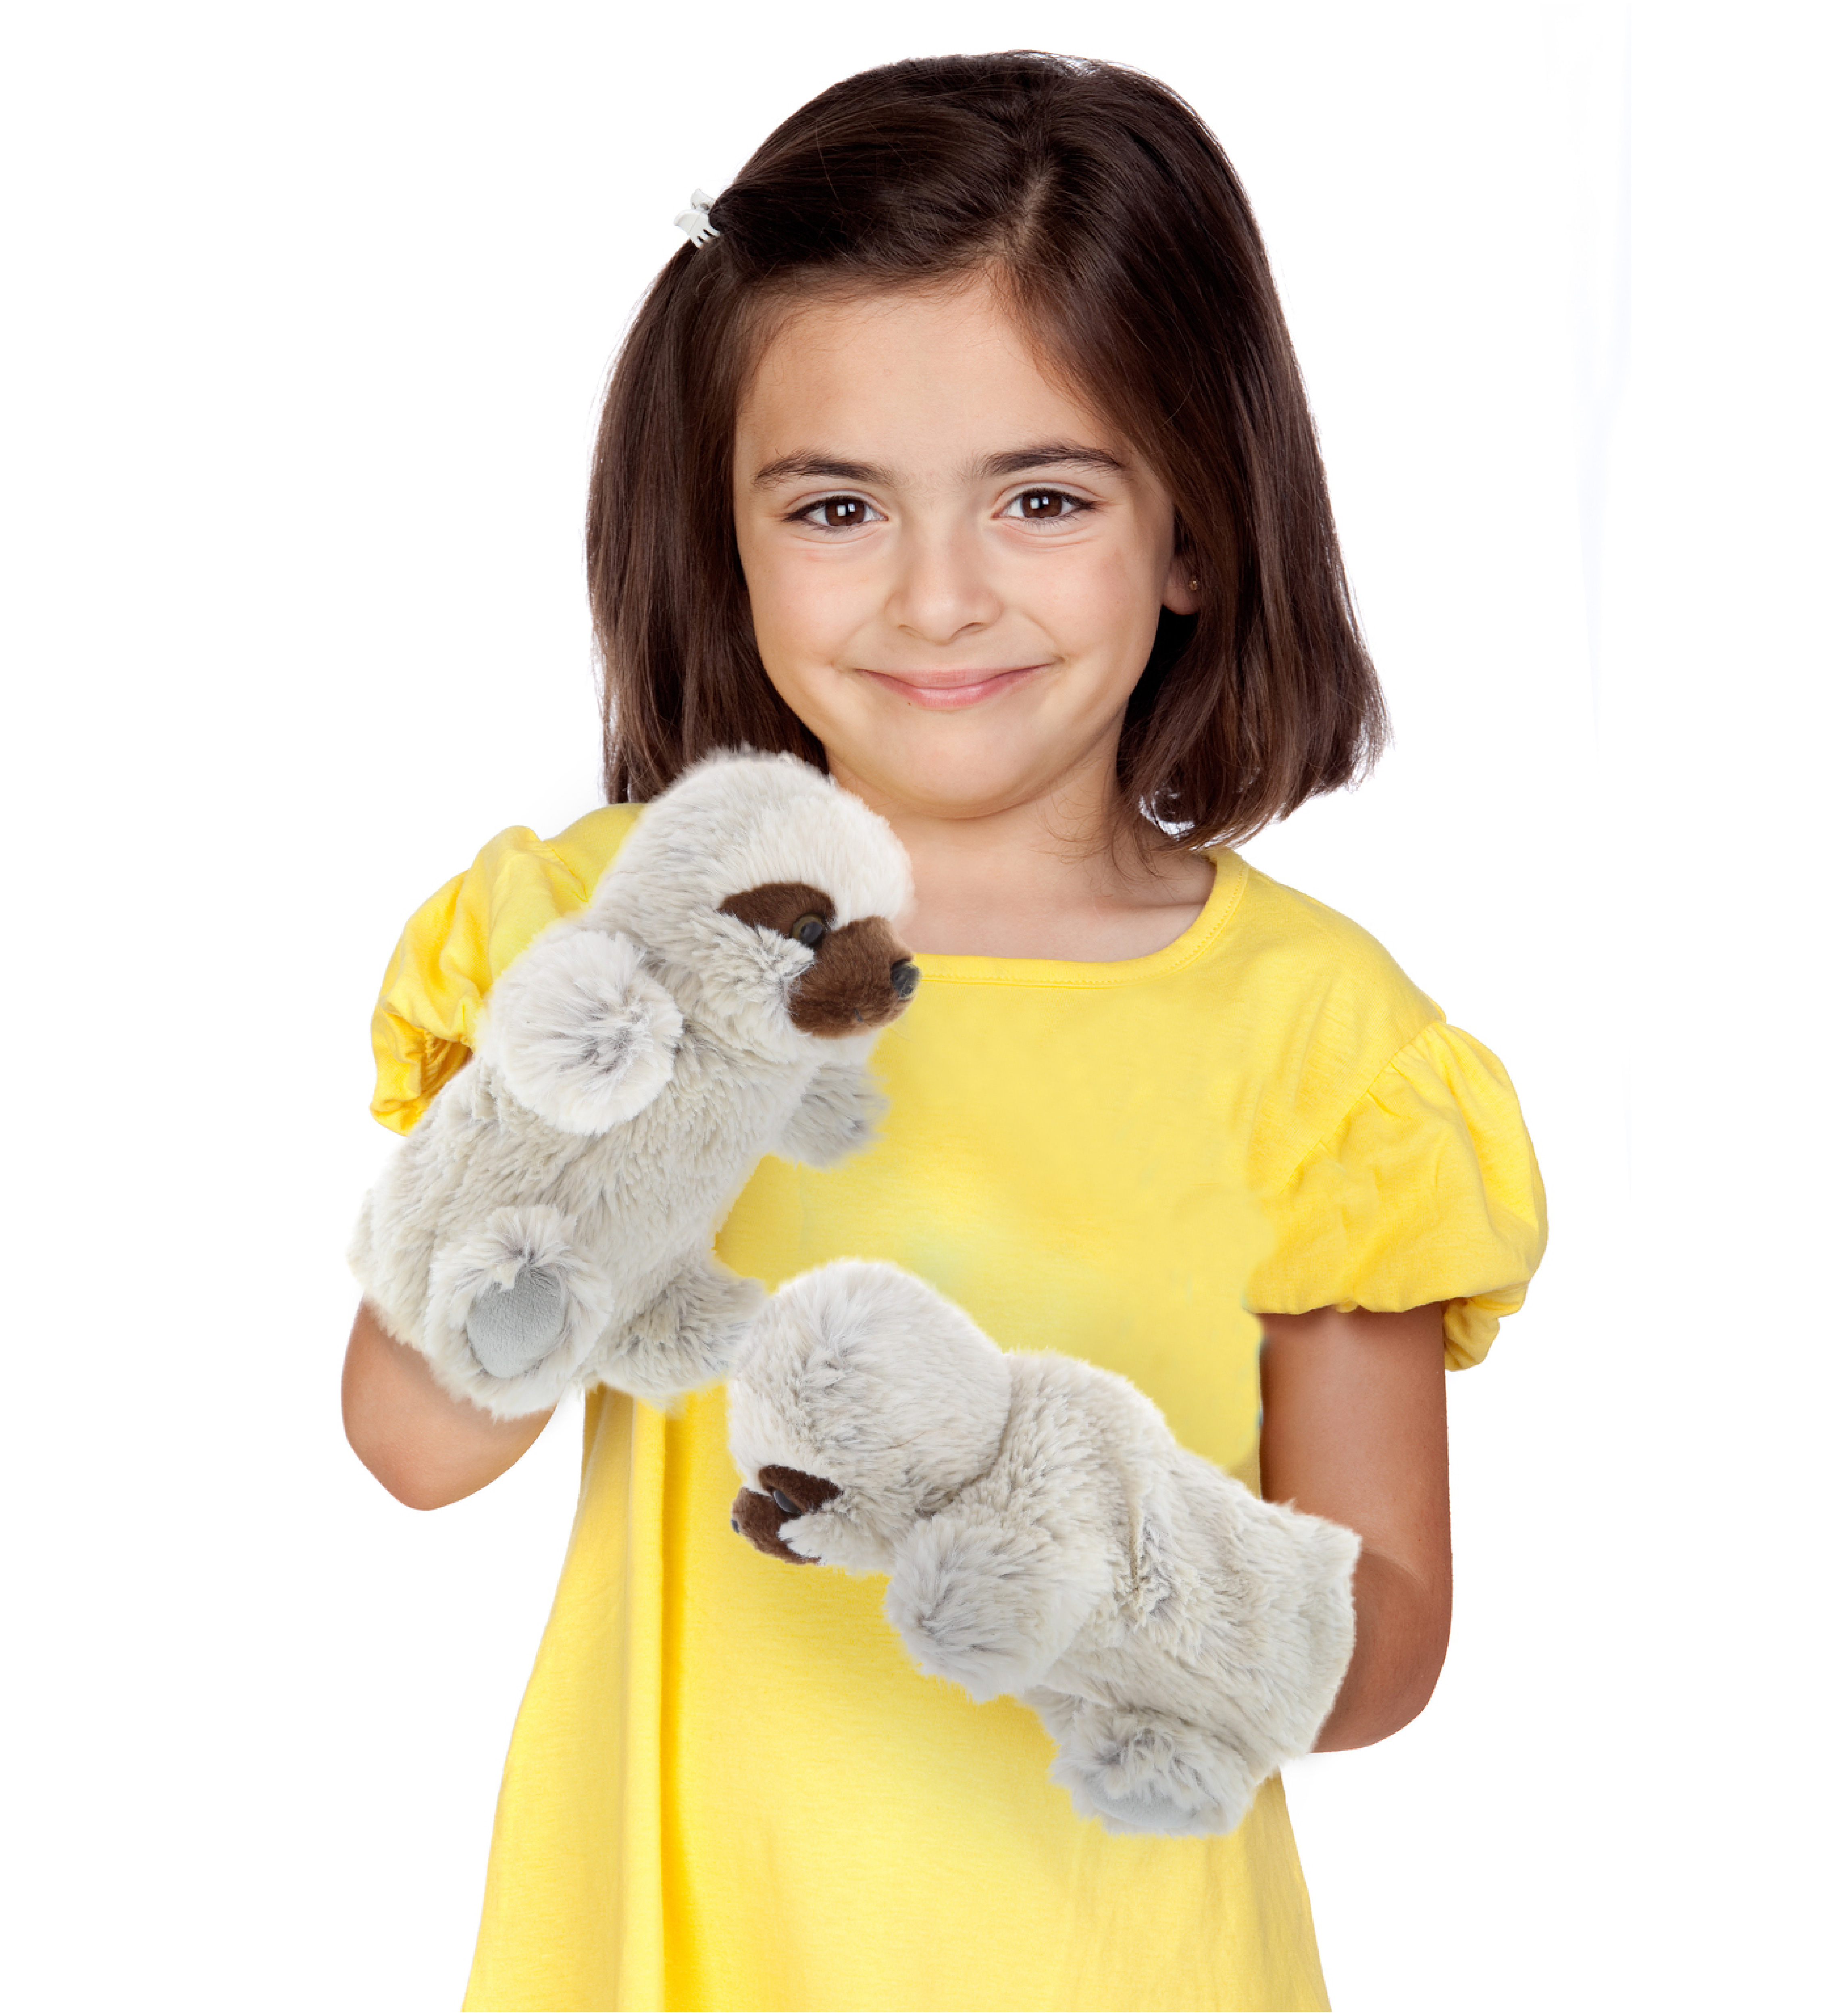 Children Baby Kid Story Learning Cute Plush Toy Animal Hand Glove Puppets Funny 